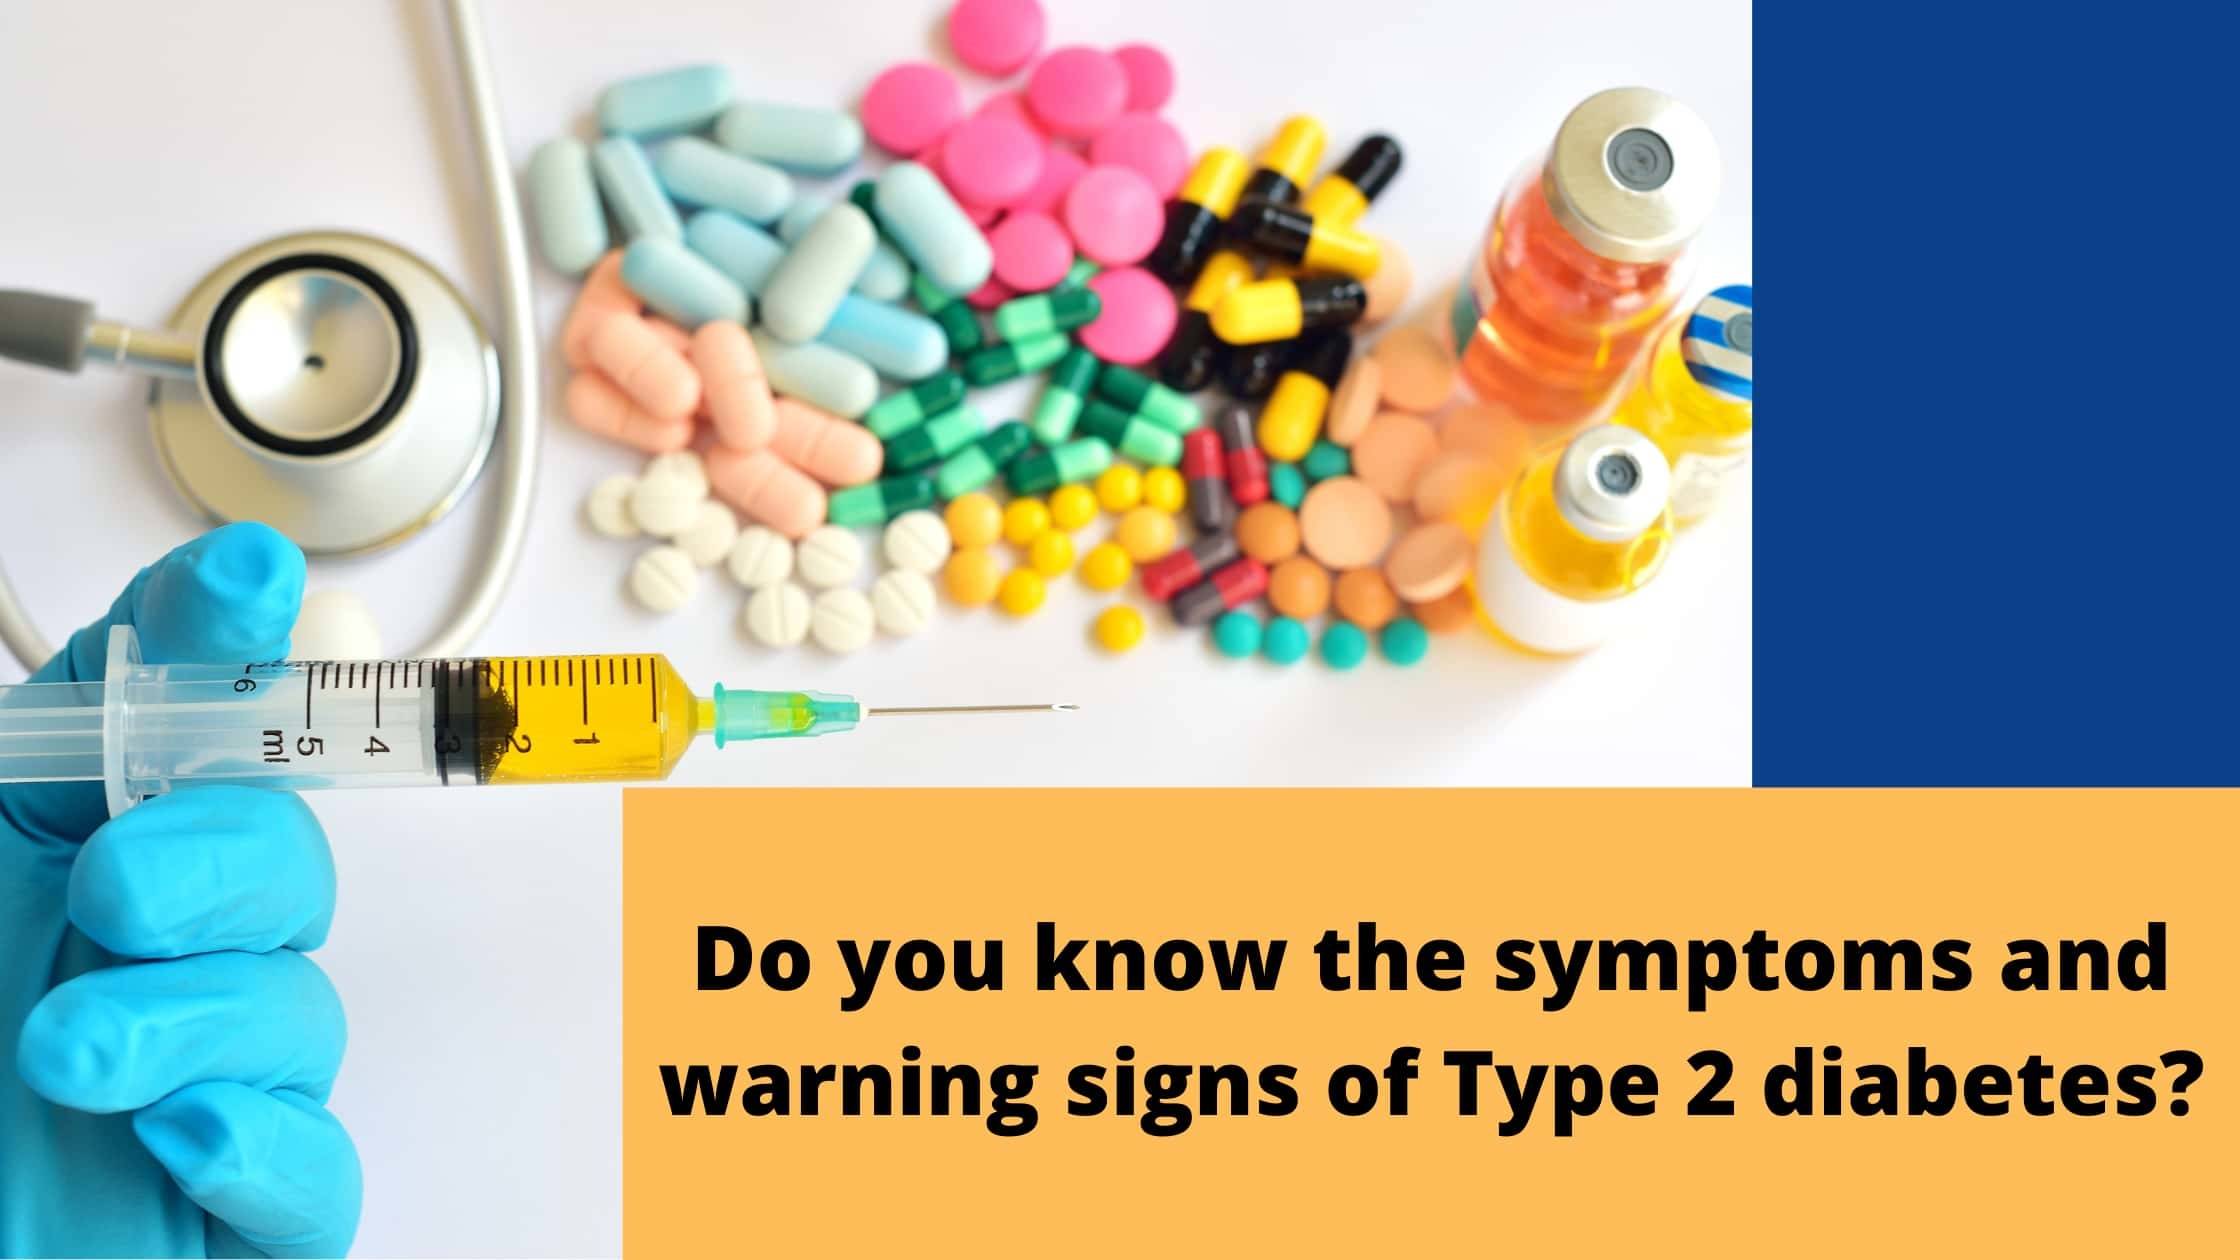 Do You Know the Symptoms and Warning Signs of Type 2 Diabetes? 